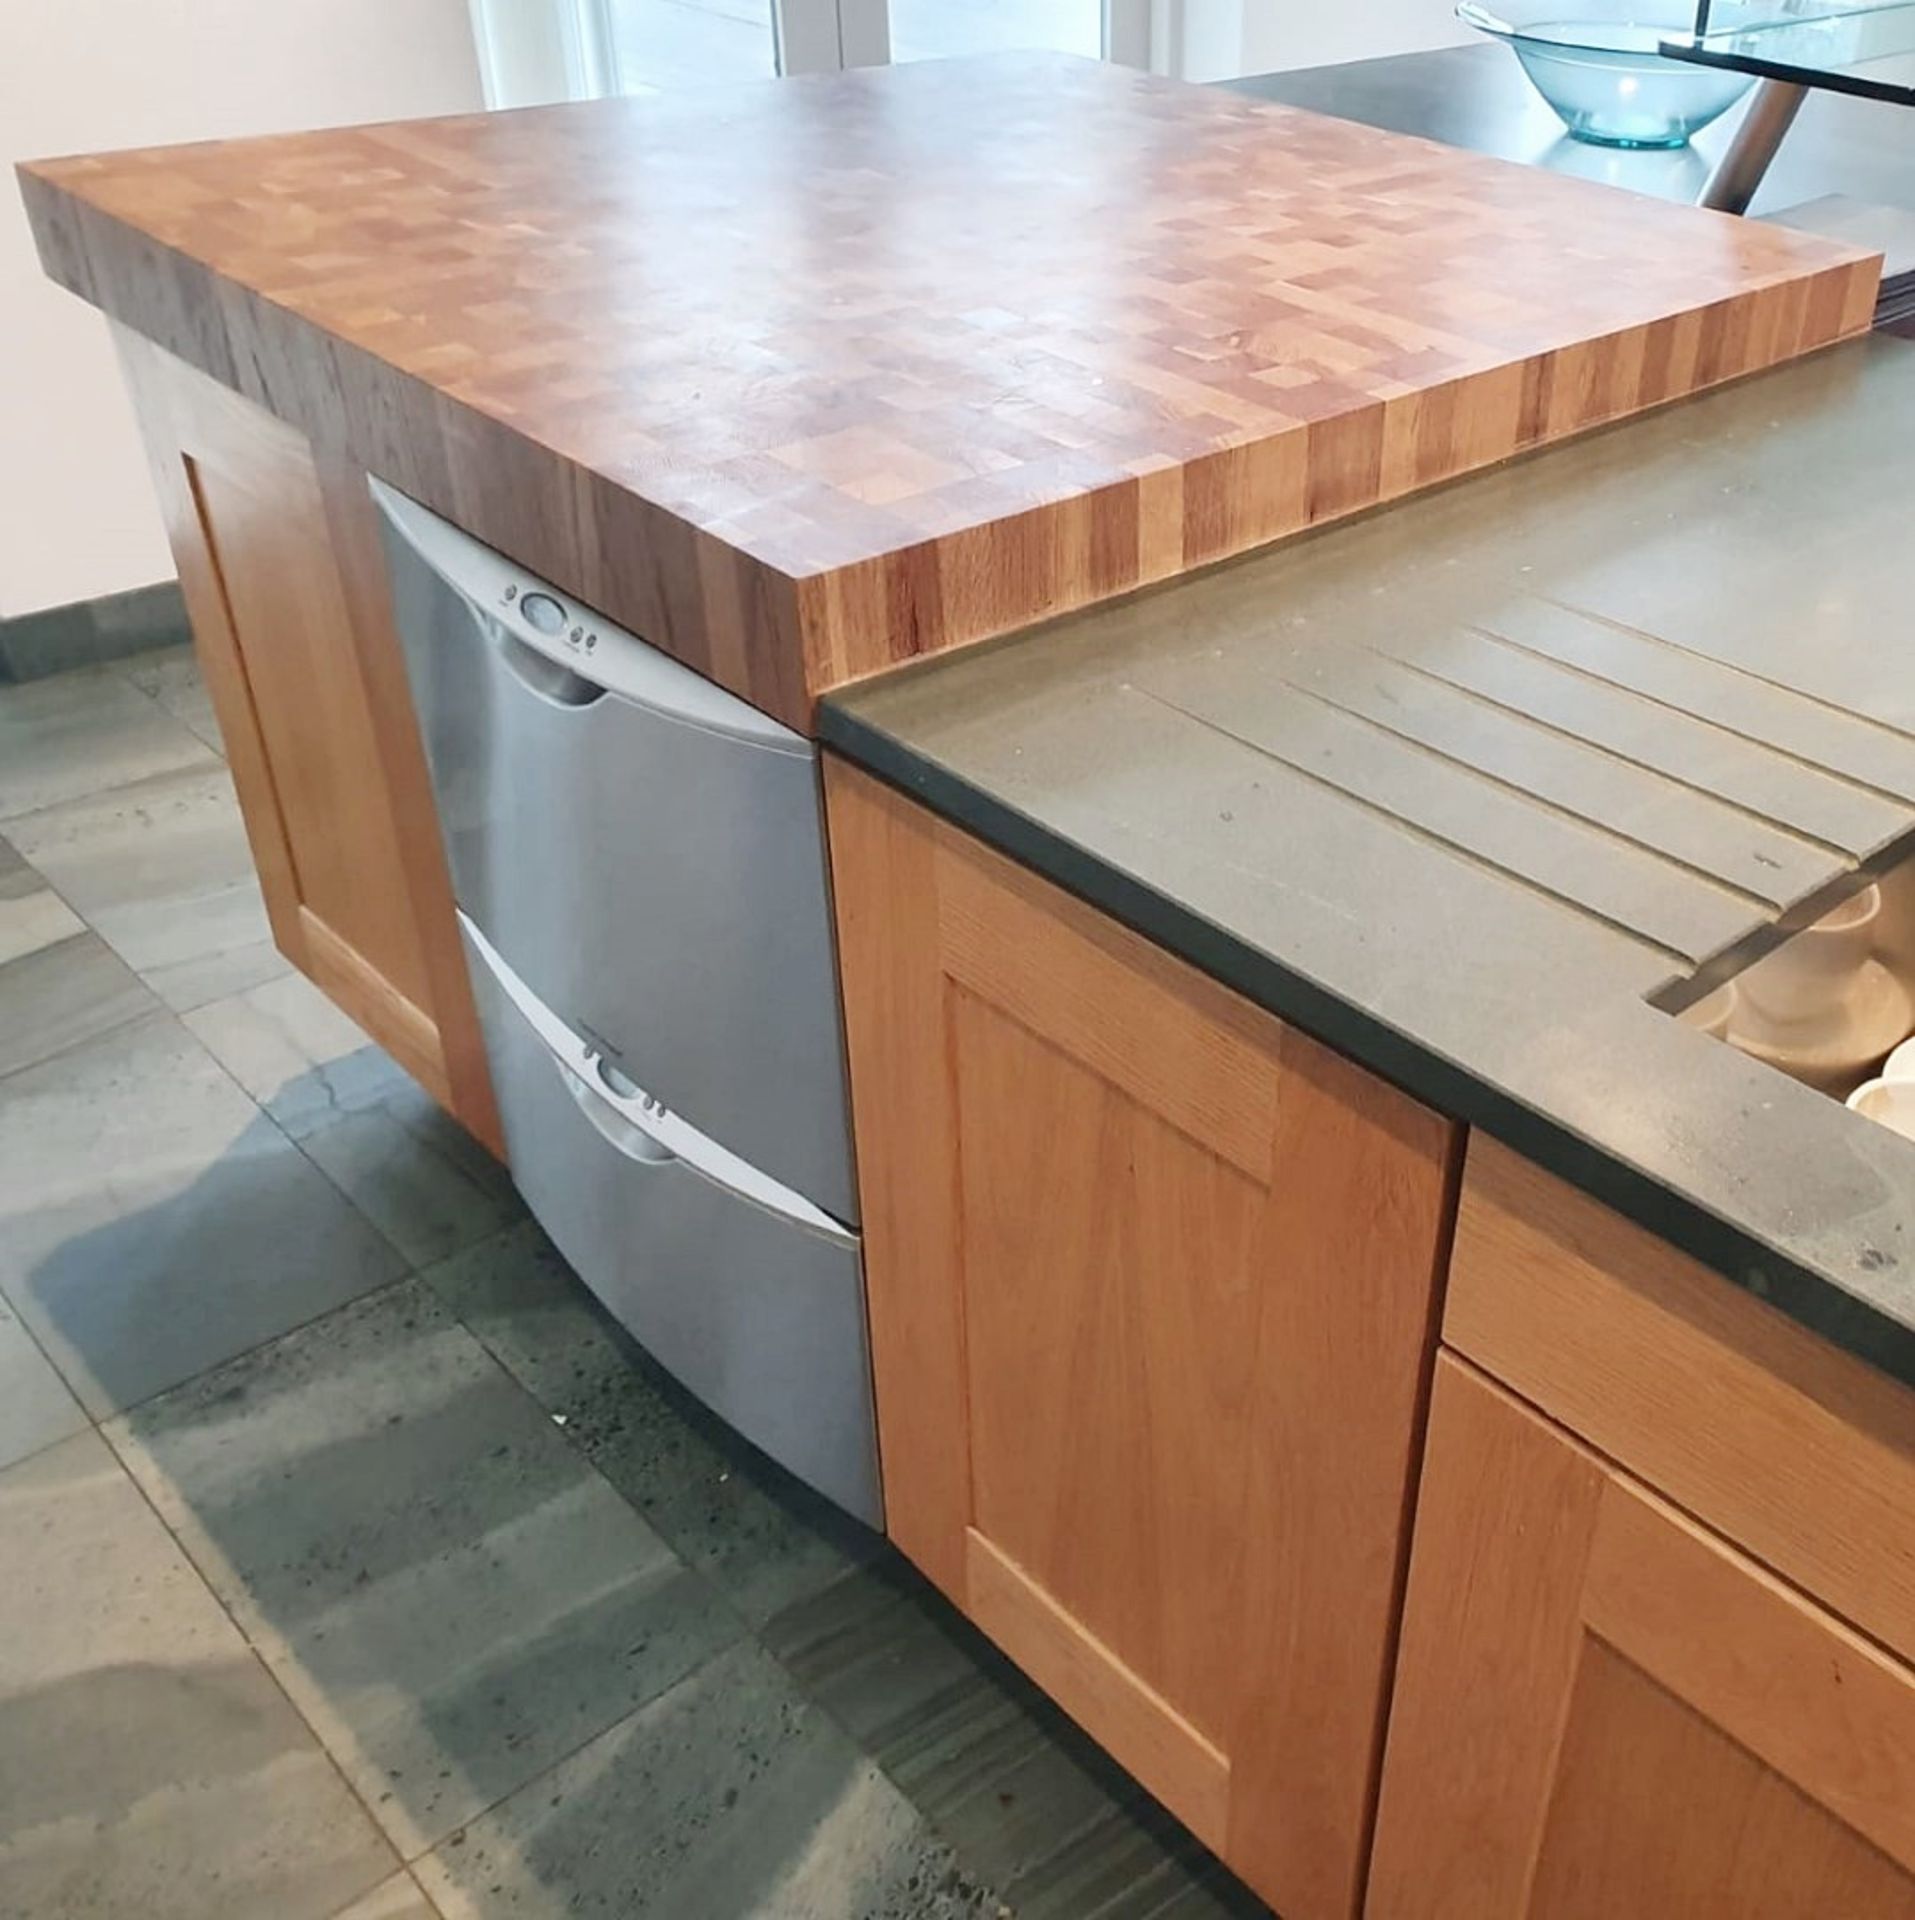 1 x Solid Oak Fitted Kitchen With Intergrated Miele Appliancess - CL487 - Location: Wigan *NO VAT* - Image 11 of 82